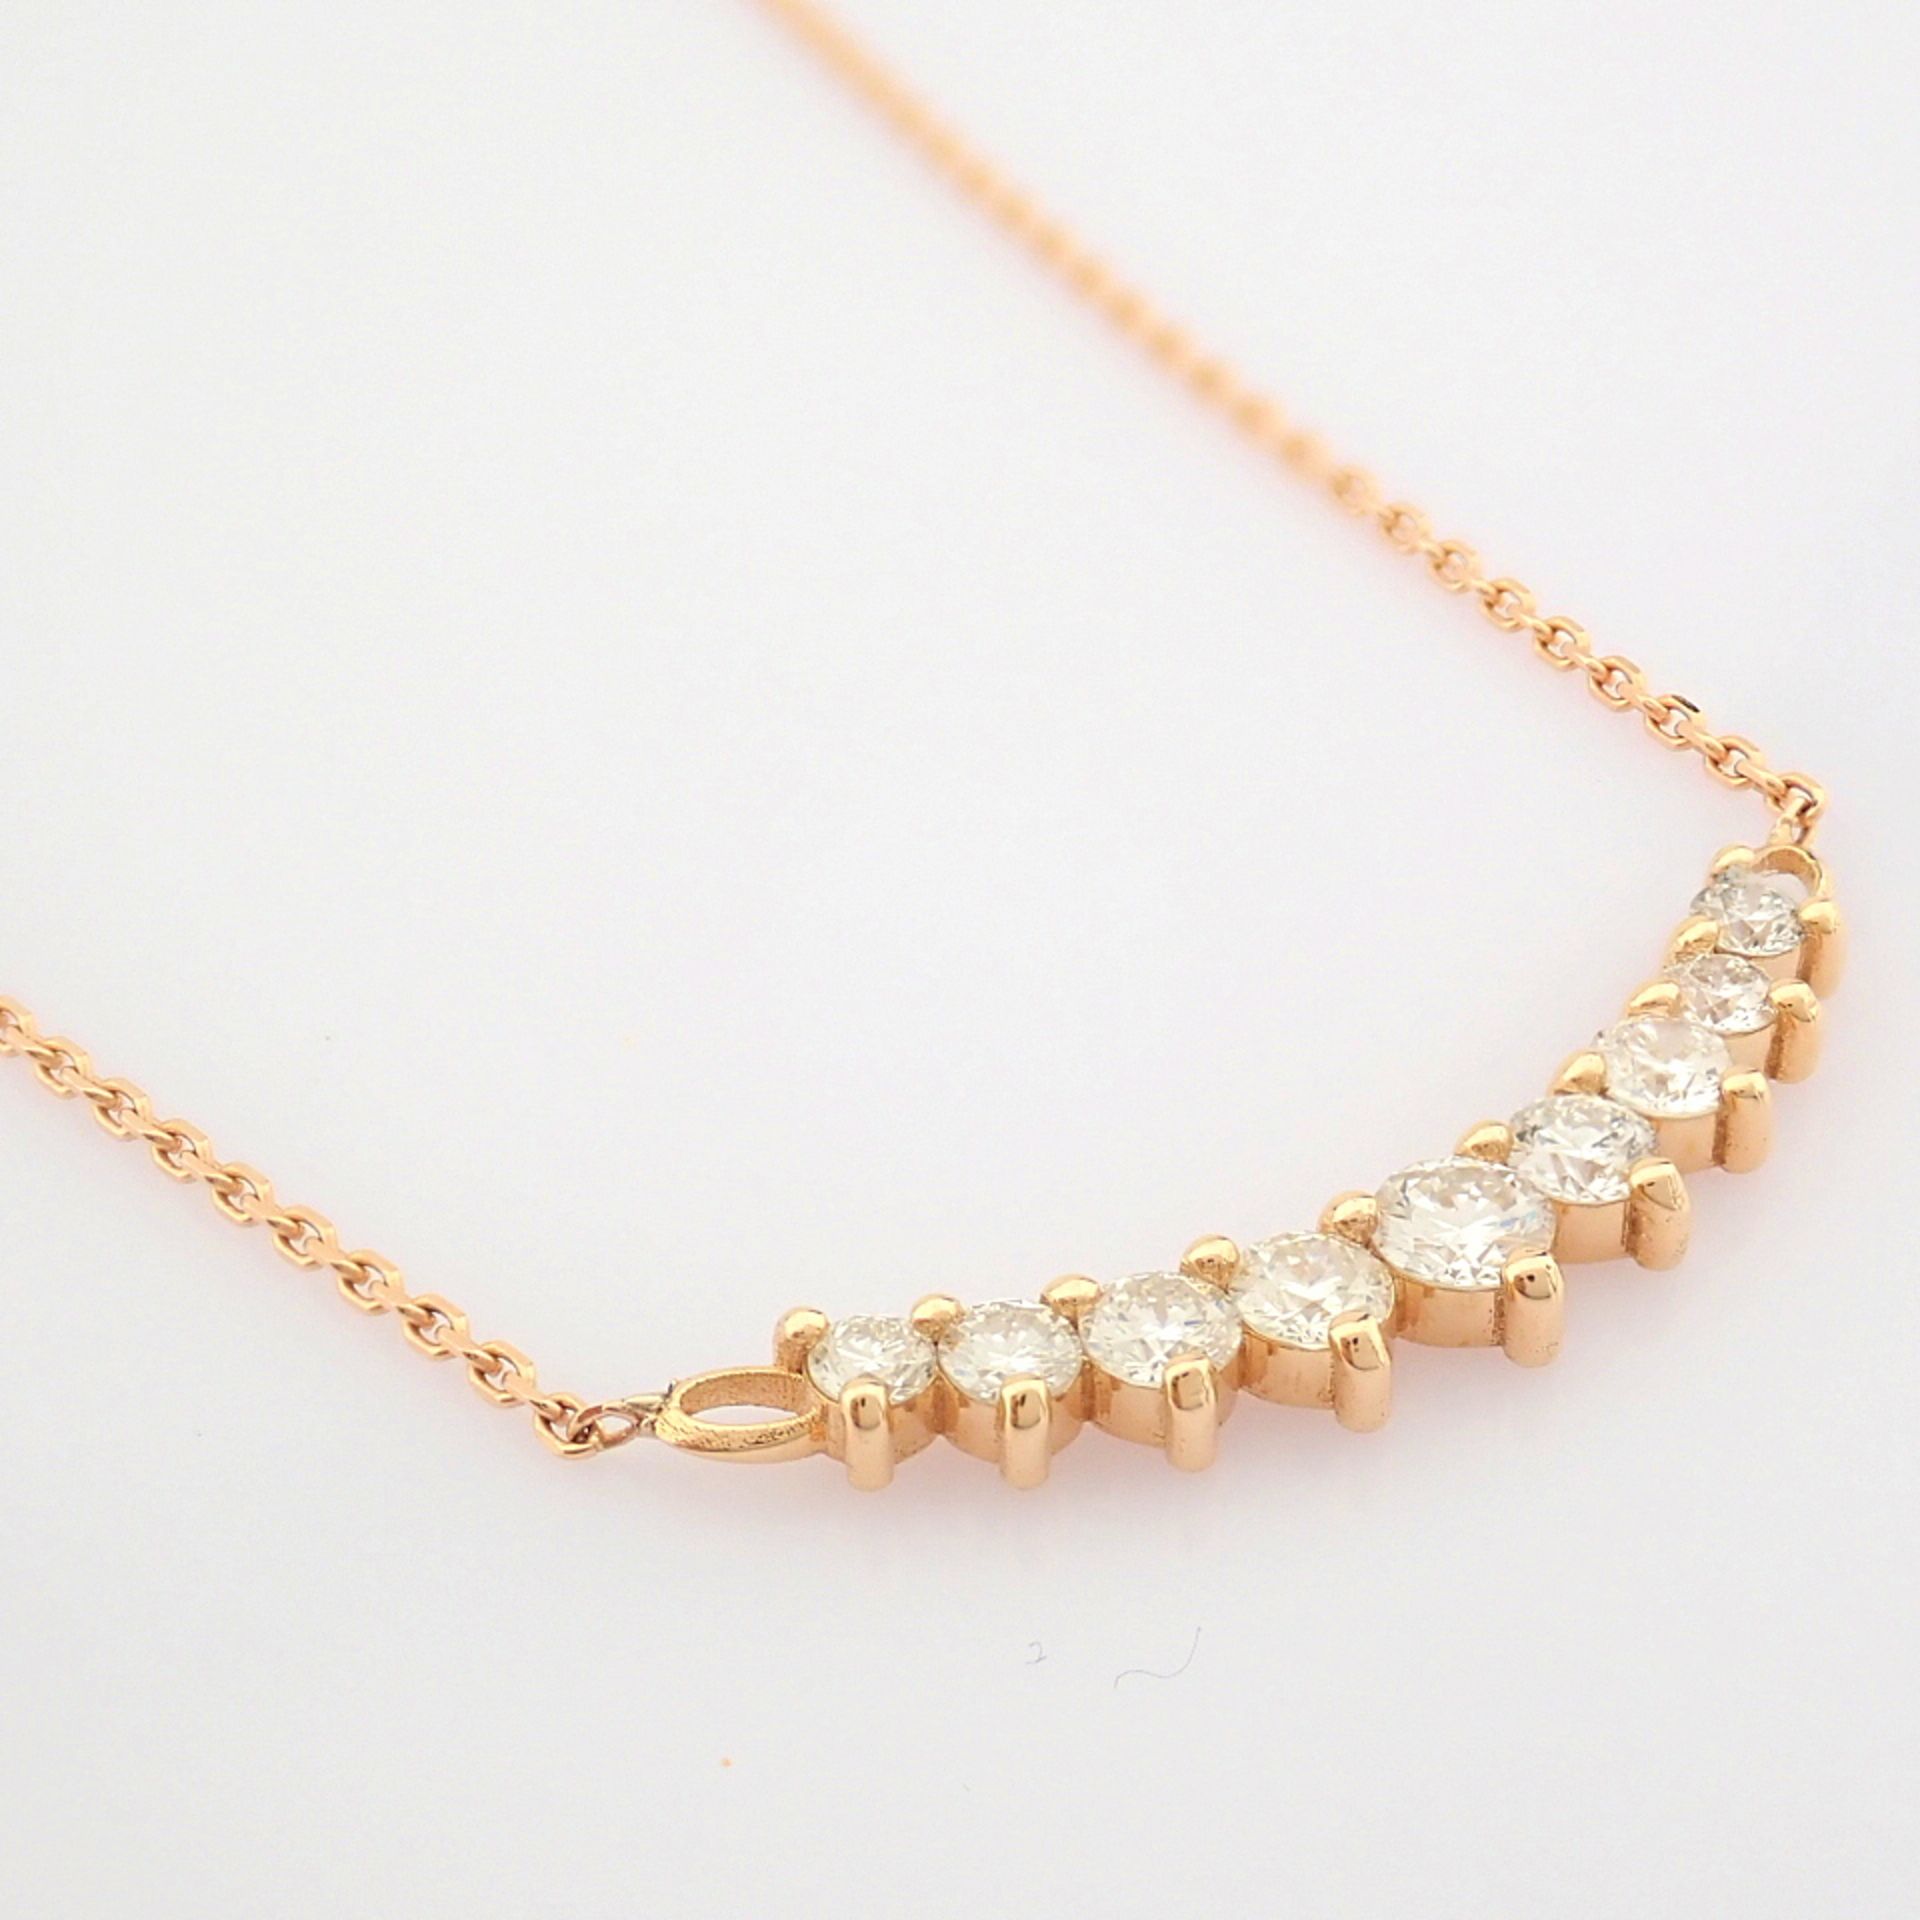 Certificated 14K Rose/Pink Gold Diamond Necklace (Total 0.56 ct Stone) - Image 4 of 9